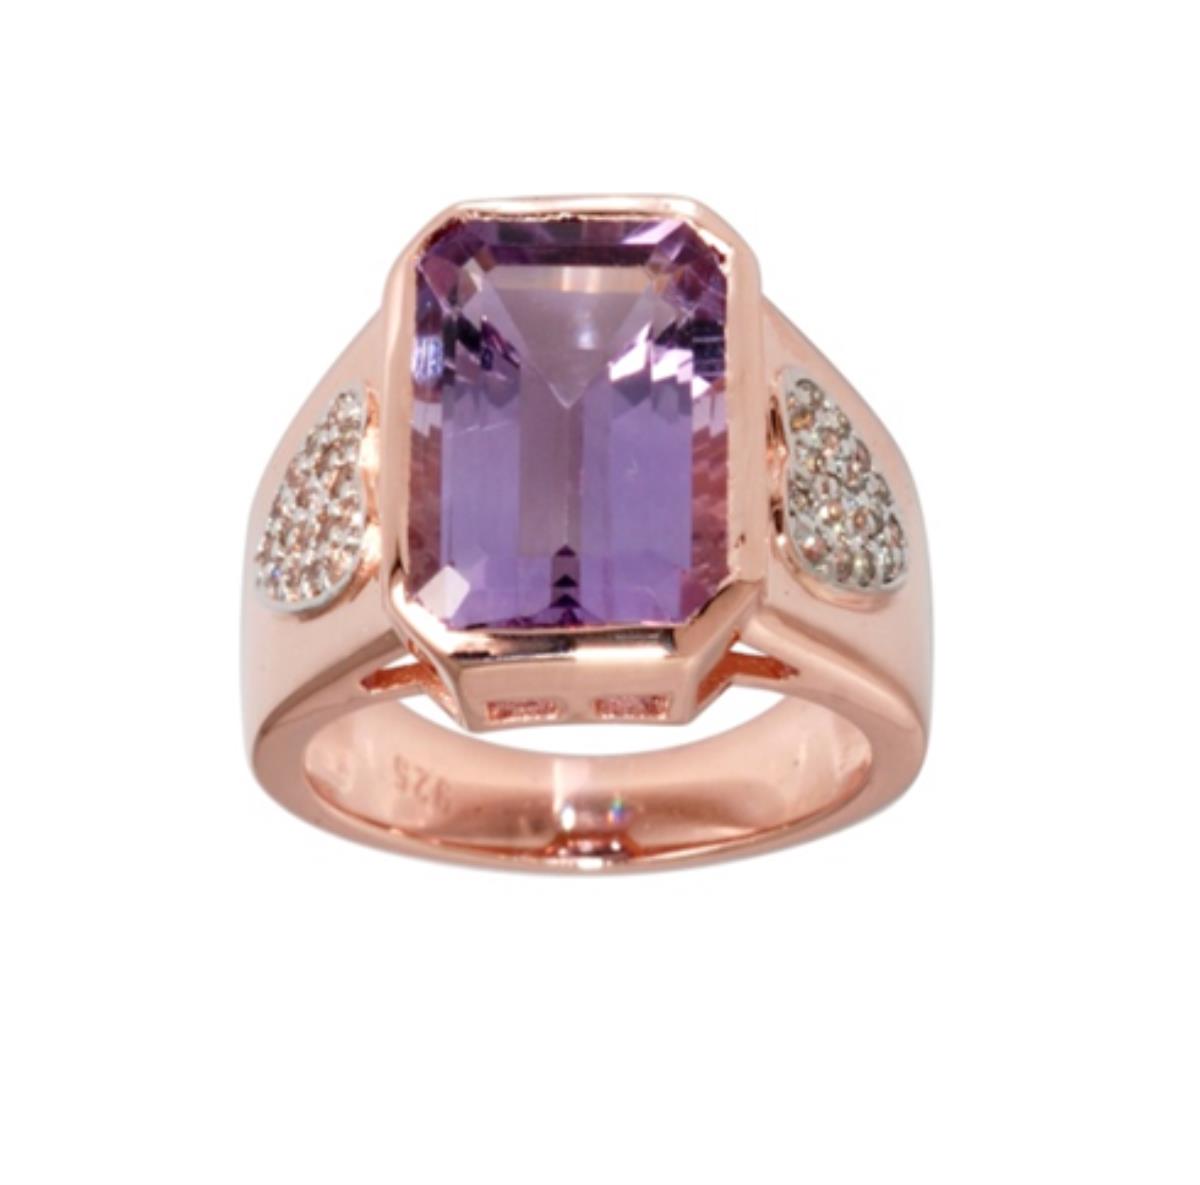 Sterling Silver Rose 14x10mm Amethyst Octagonal Cut with White Zircon Pave Sides Fashion Ring